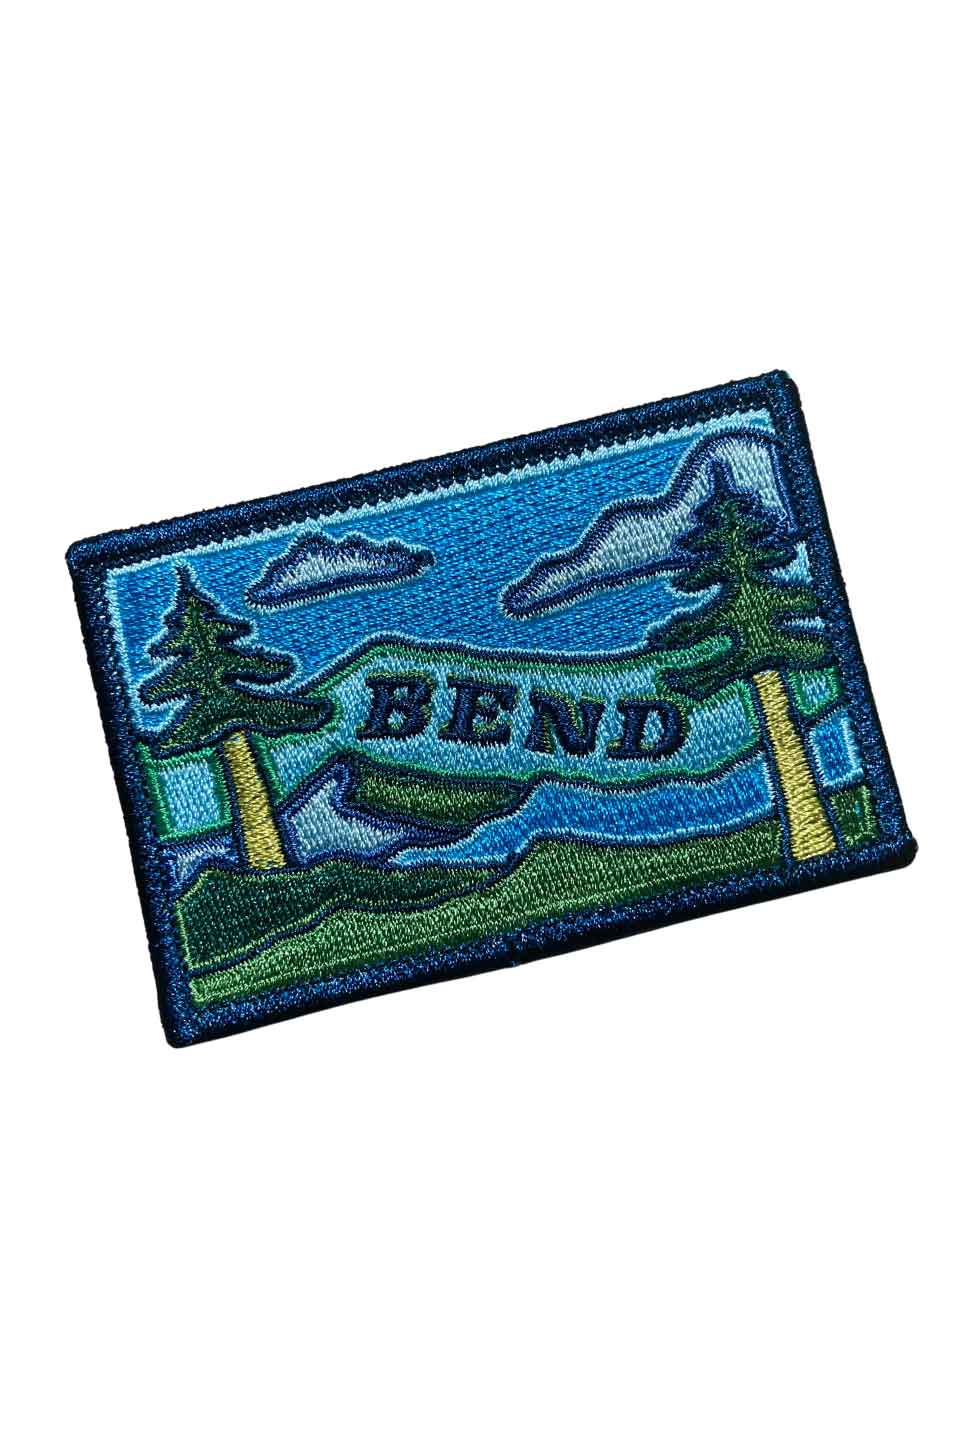 BEND IN THE ROAD PATCH